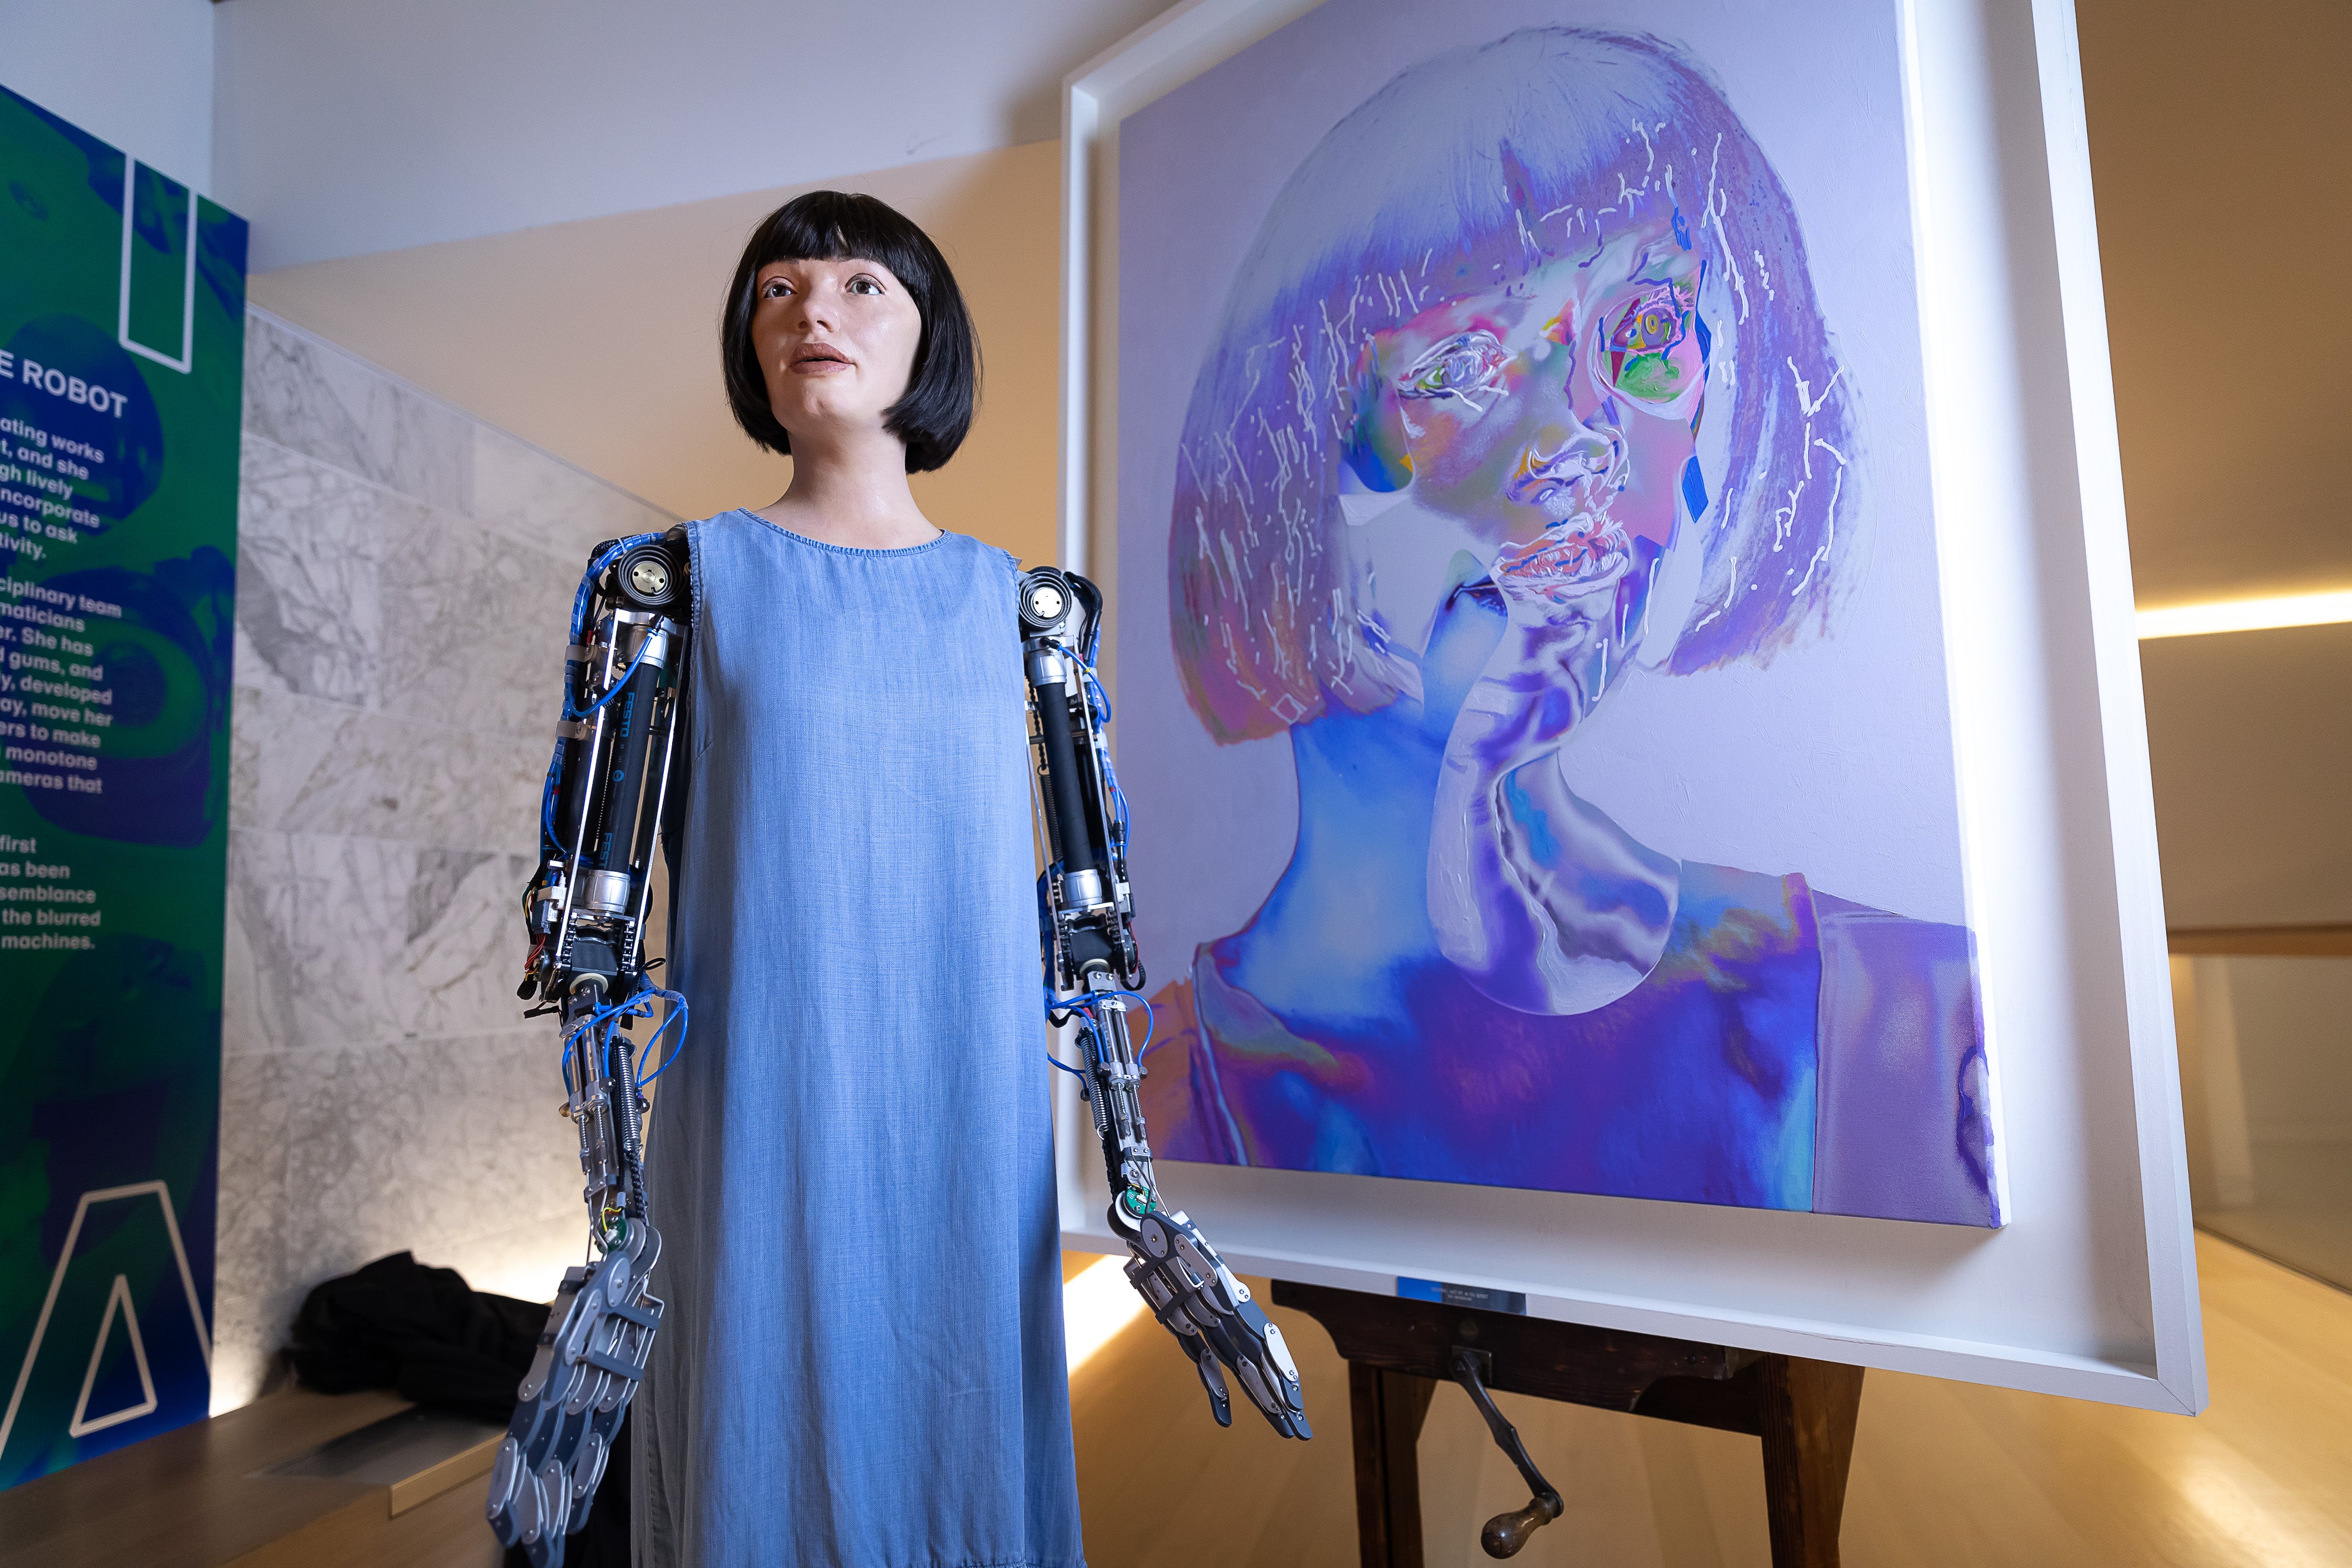 I can't really gouge her eyes out': Art robot stopped at Egypt airport in spy | The Independent